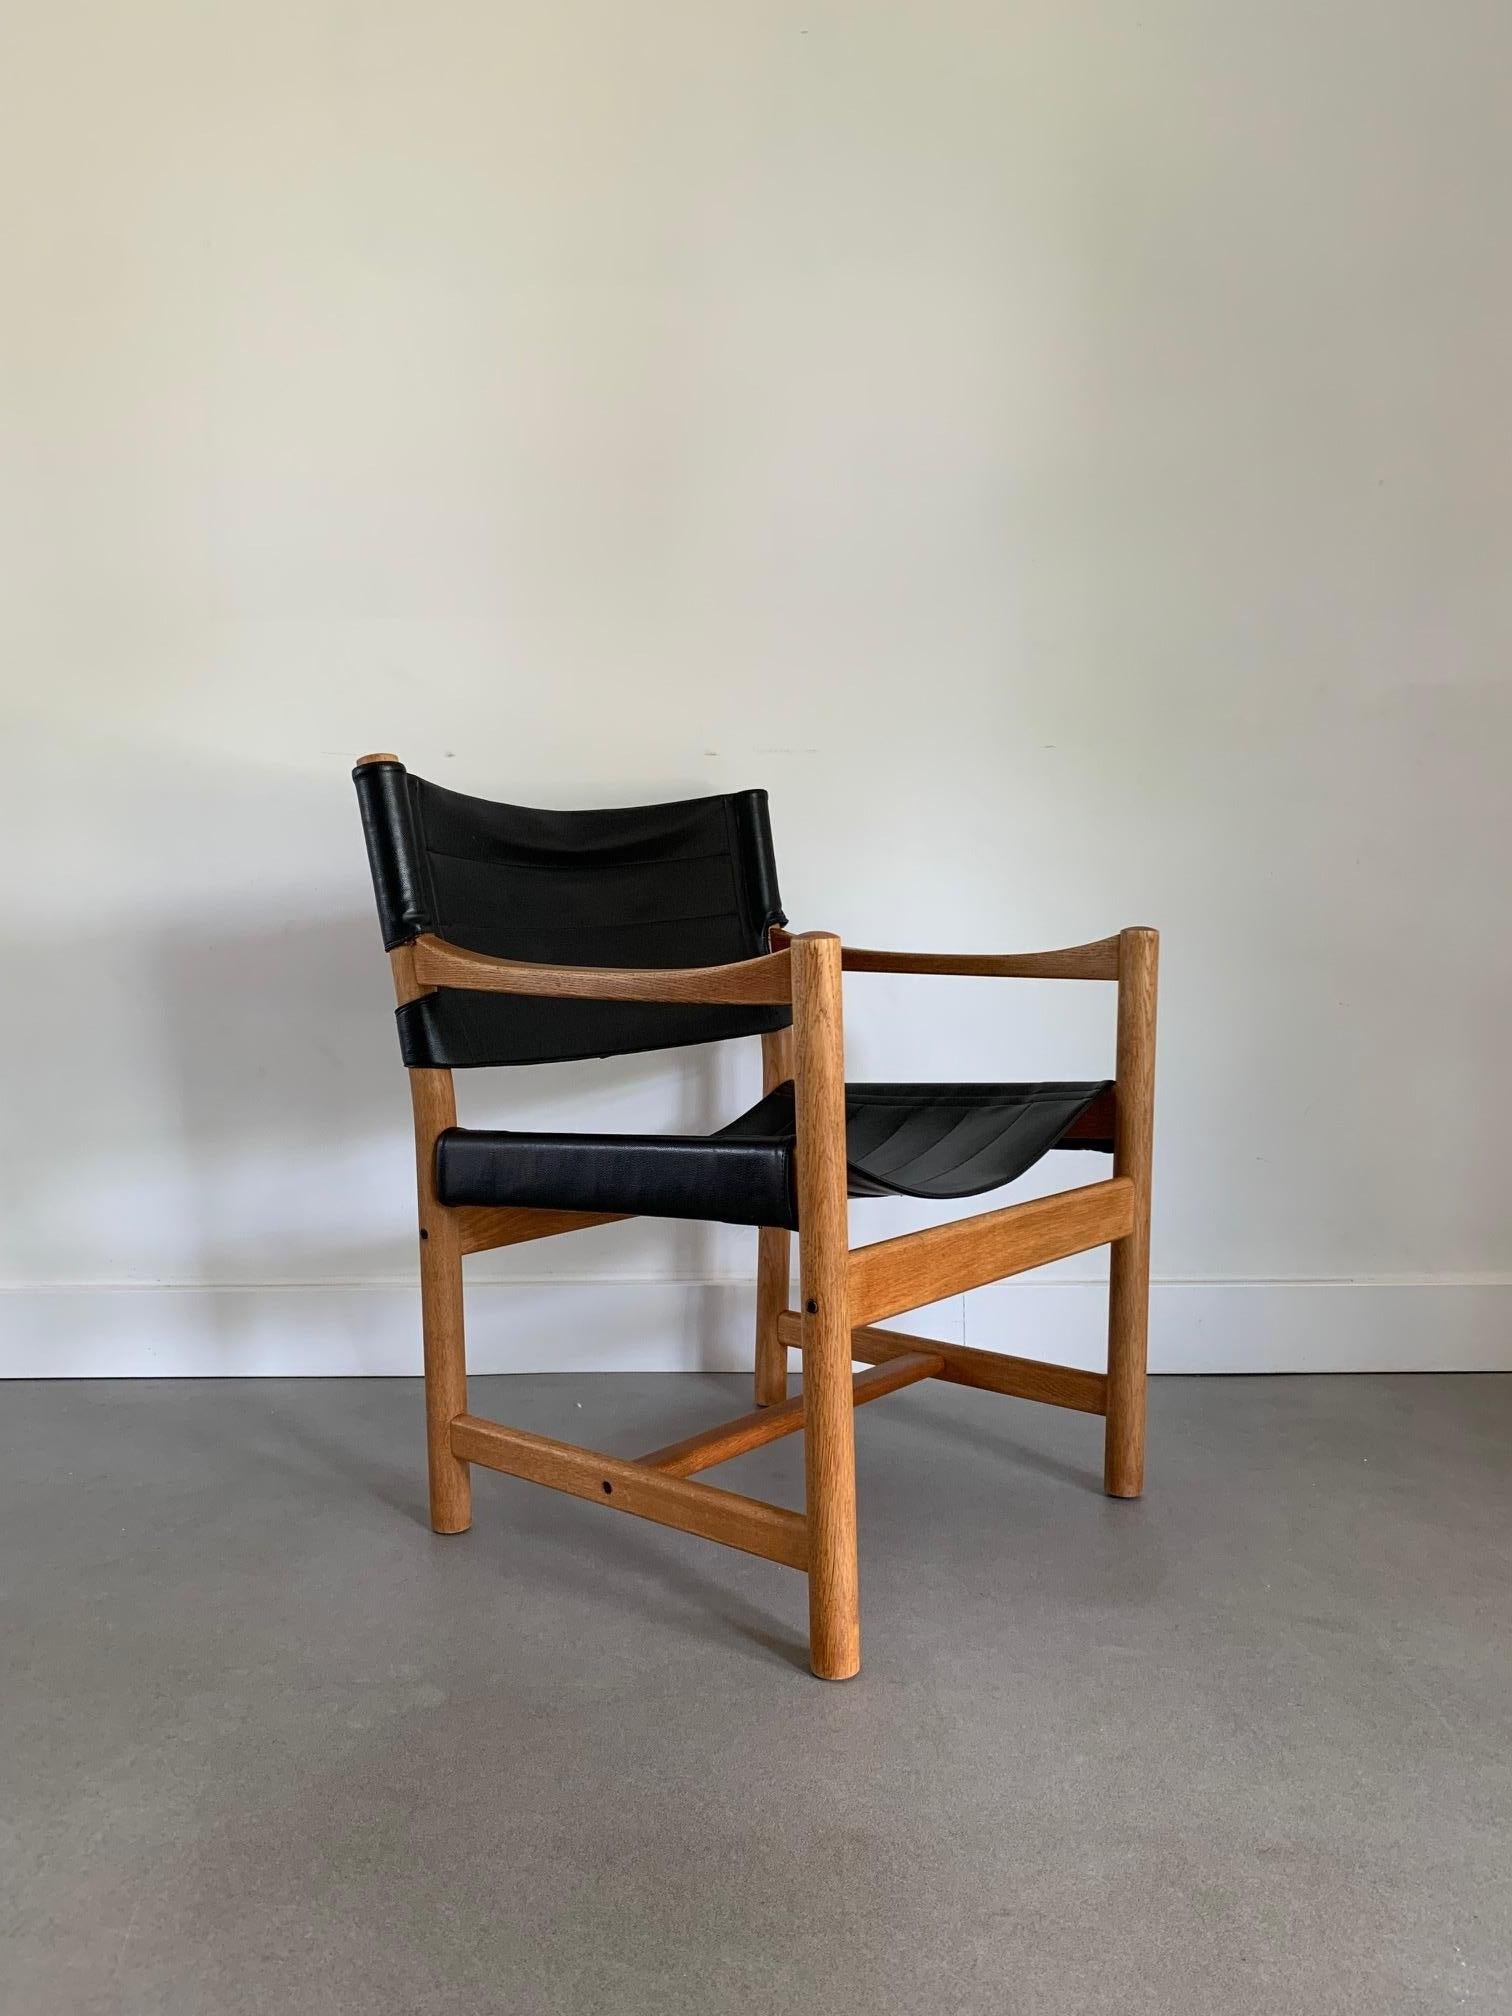 And action.
It looks like the perfect combination between a directors-chairs and a safari-chair. The mid-century looks completes it.

The Ditte and Adrian Heath Armchair is a mid-century modern furniture piece designed for FDB Møbler, a Danish